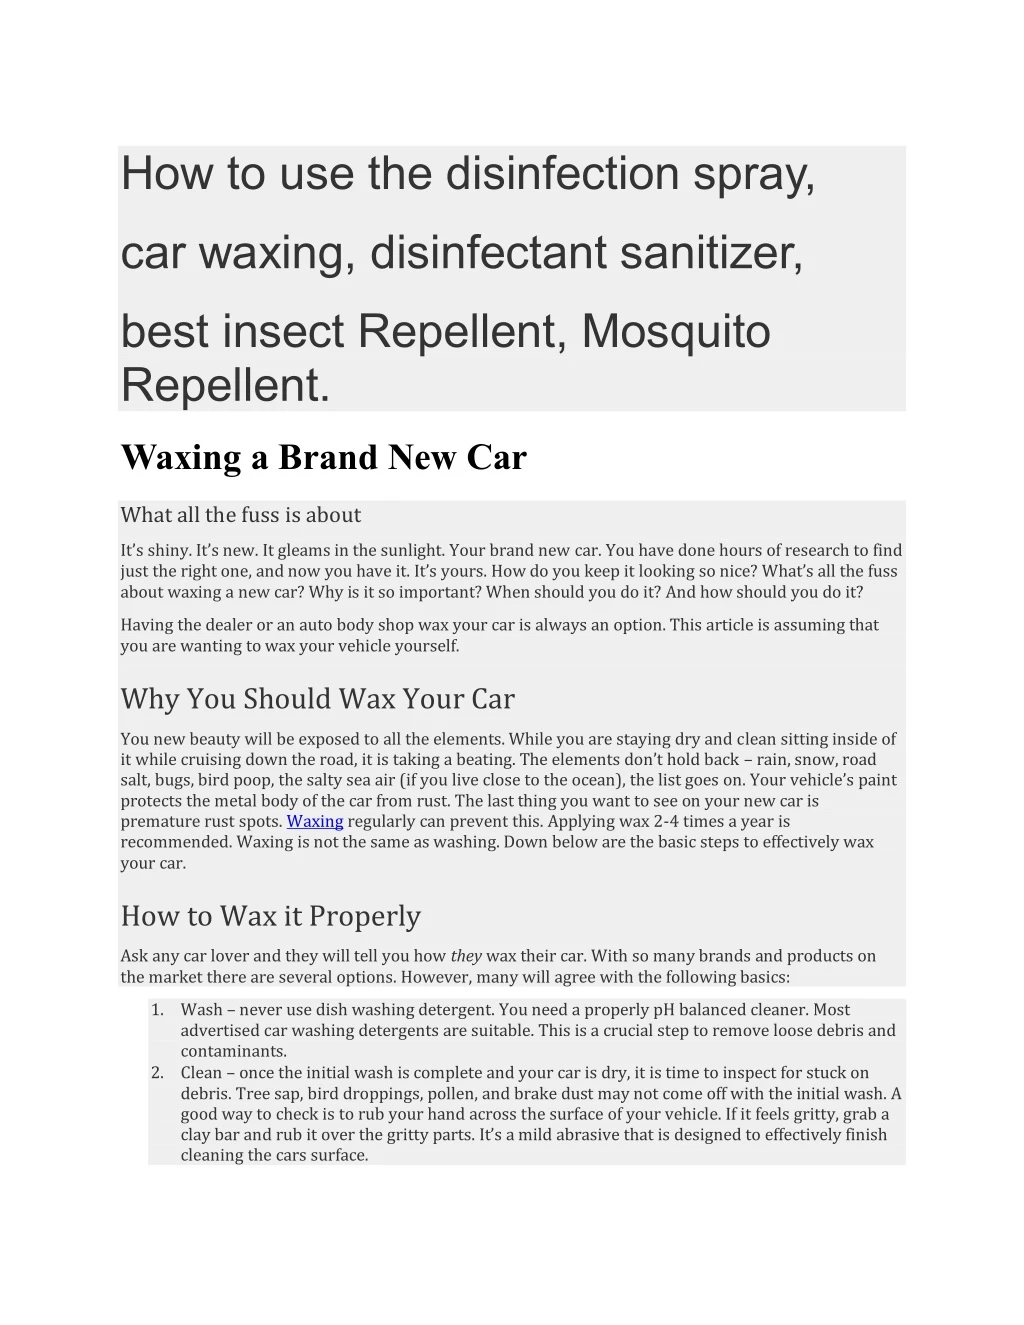 how to use the disinfection spray